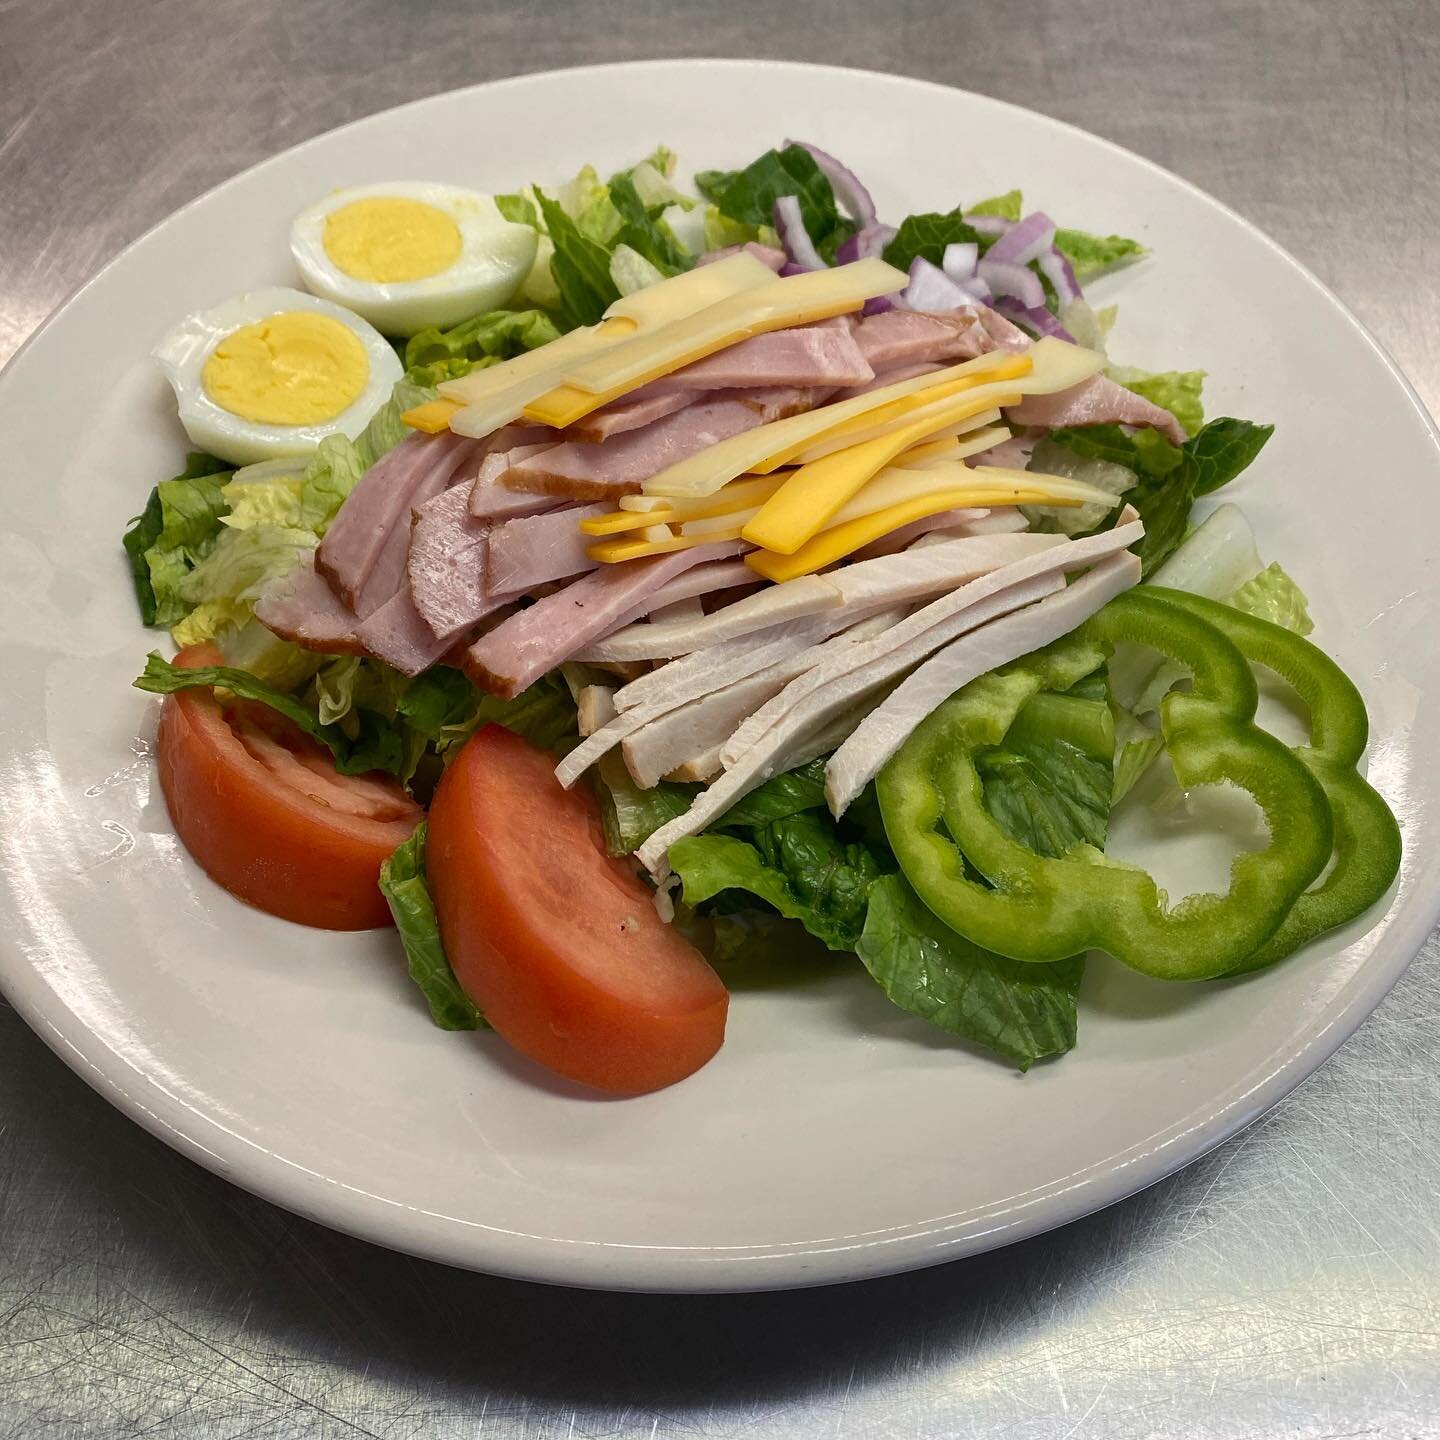 Summer is for salads. 🥗 Try our chef salad!! 😀